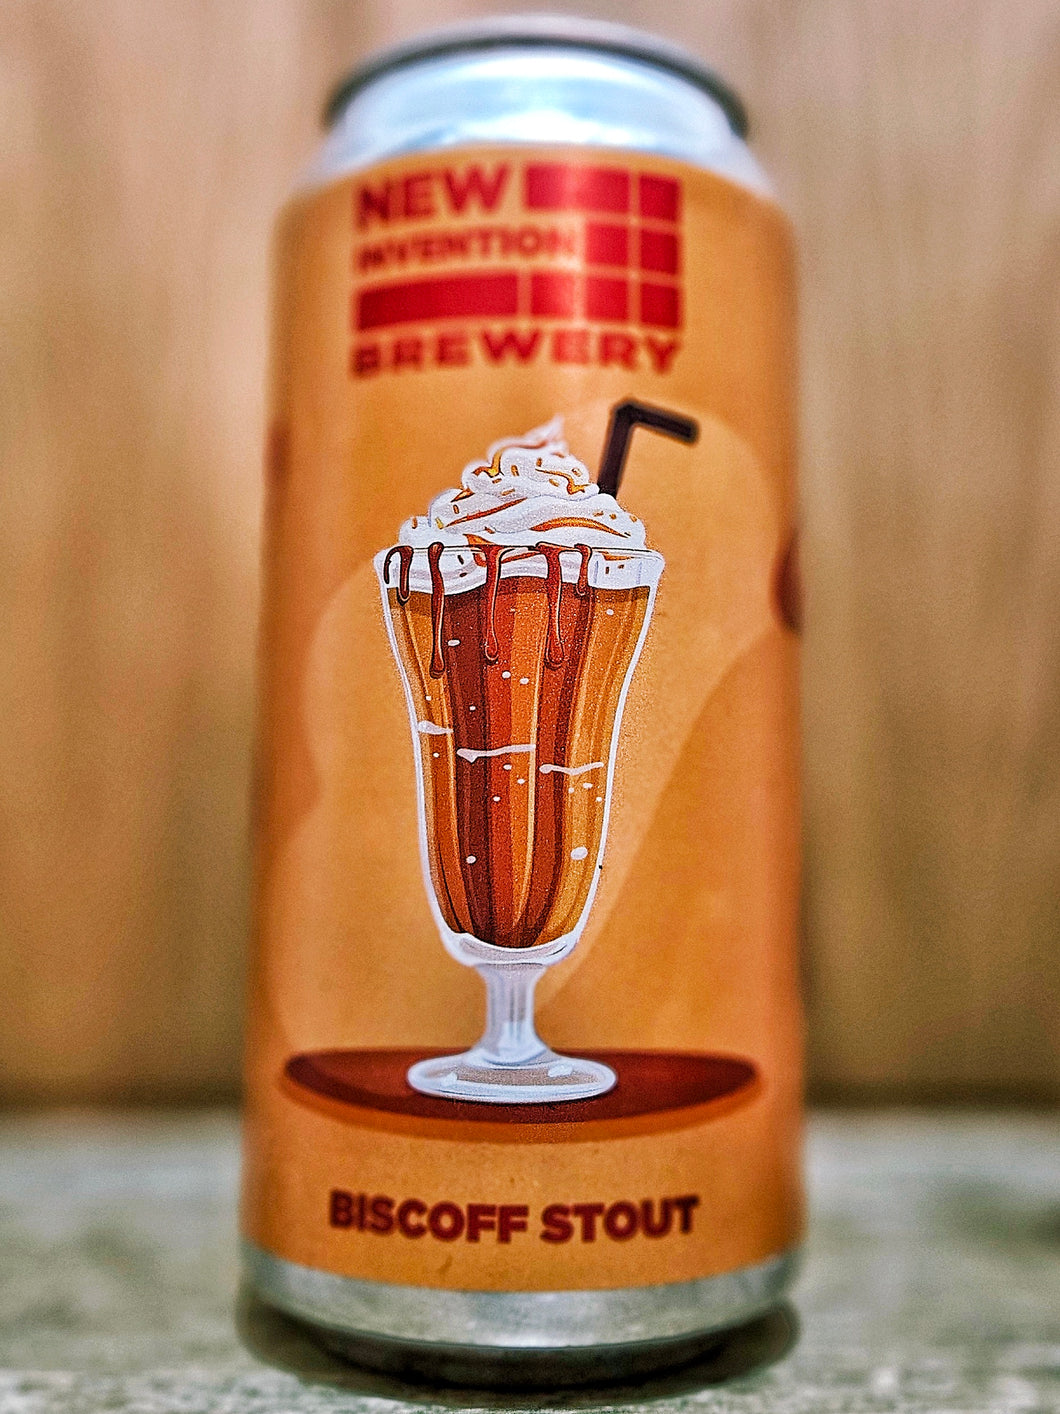 New Invention Brewery - Biscoff Stout